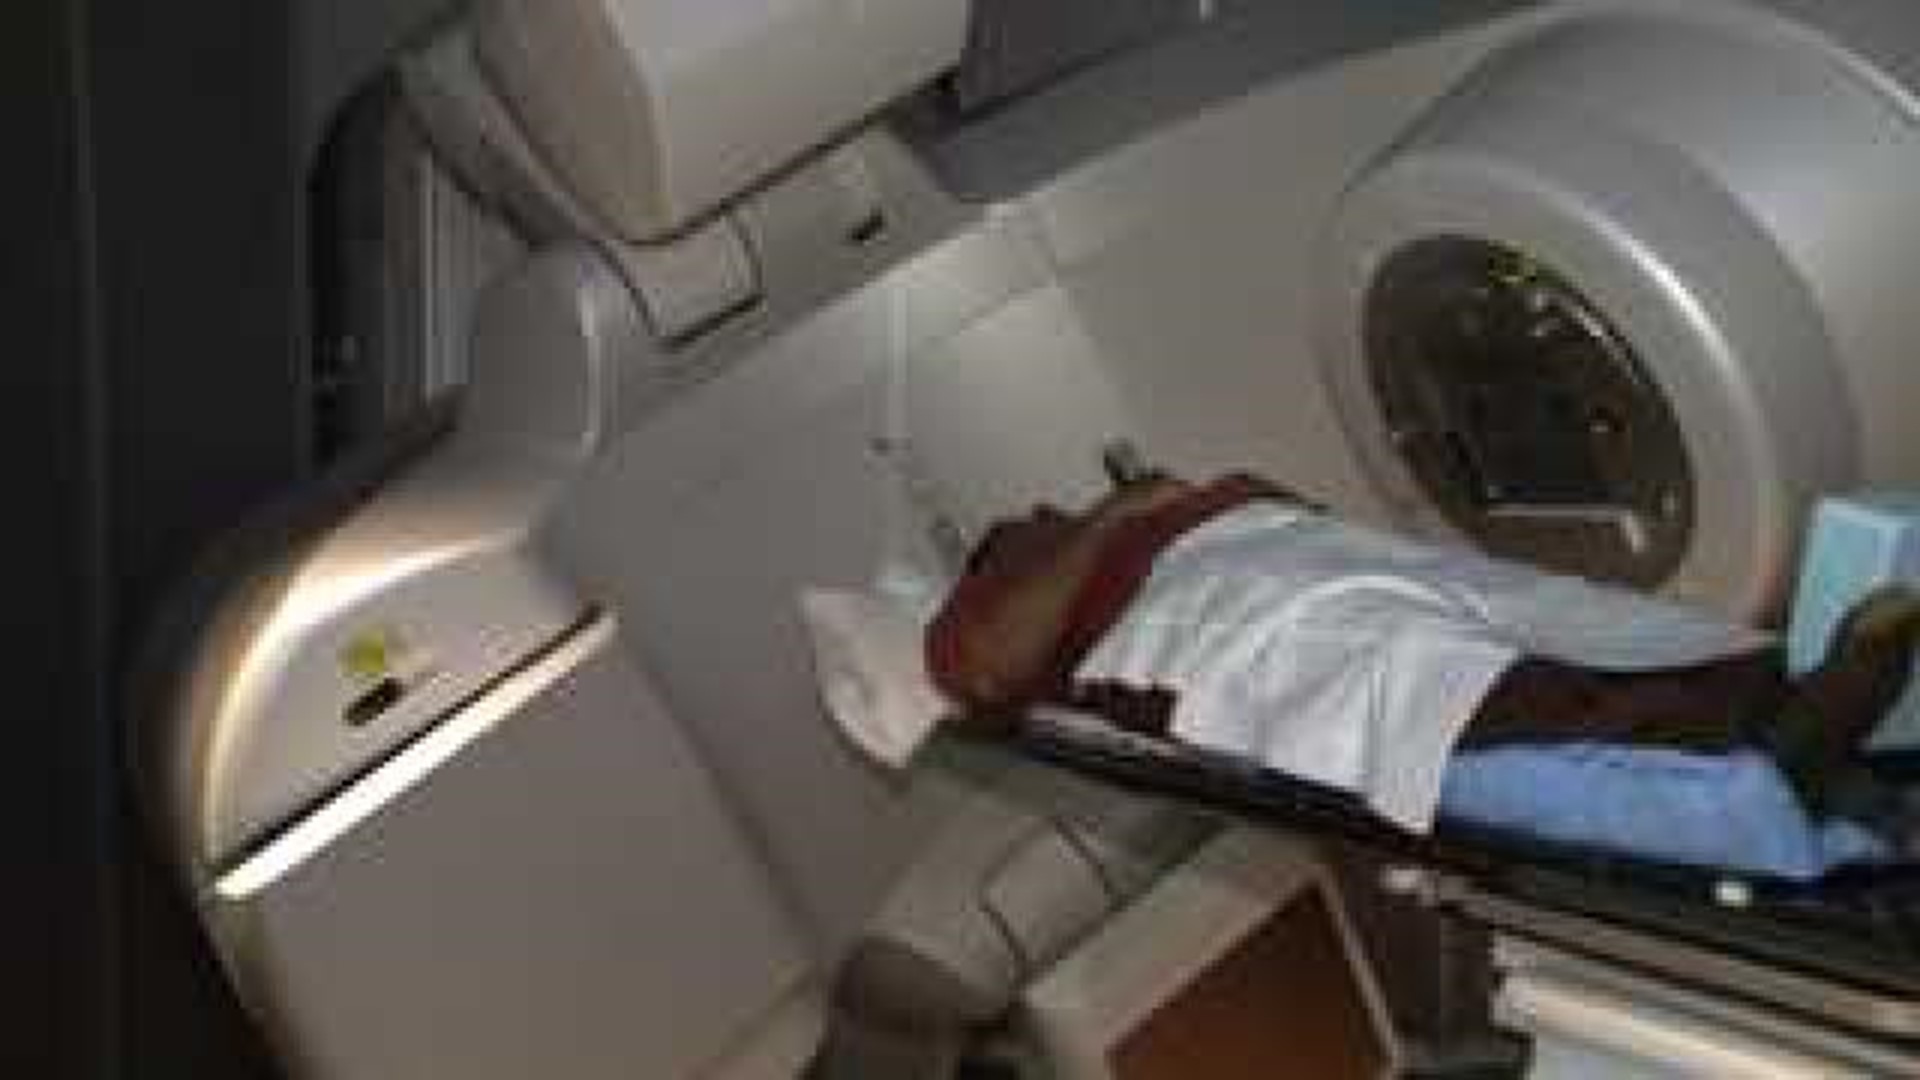 Revolutionary cancer treatment machine now in the QC